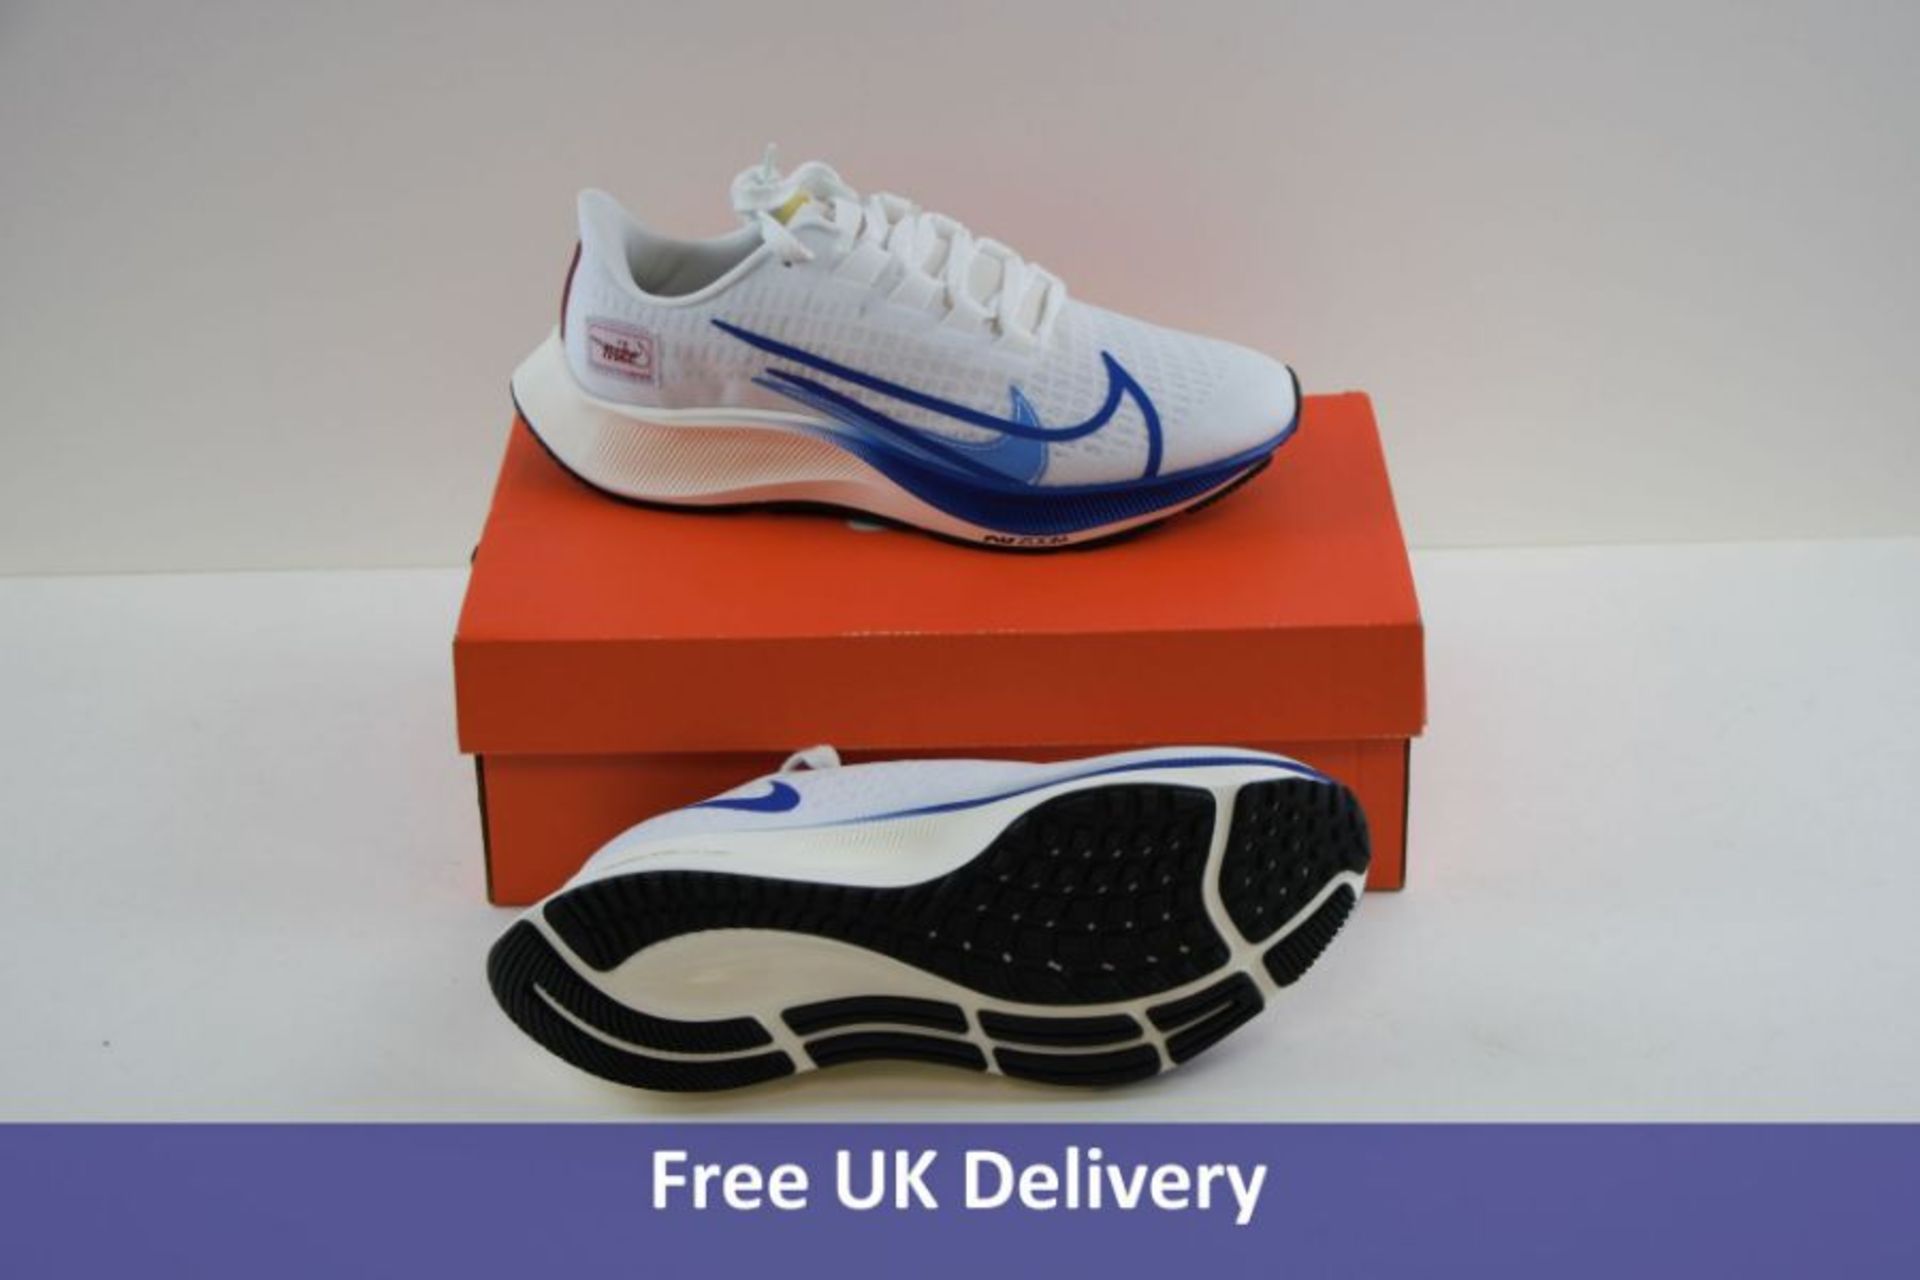 Nike Women's Air Zoom Pegasus 37 PRM Trainers, White, Game Royal and Gym Red Sail, UK 6.5